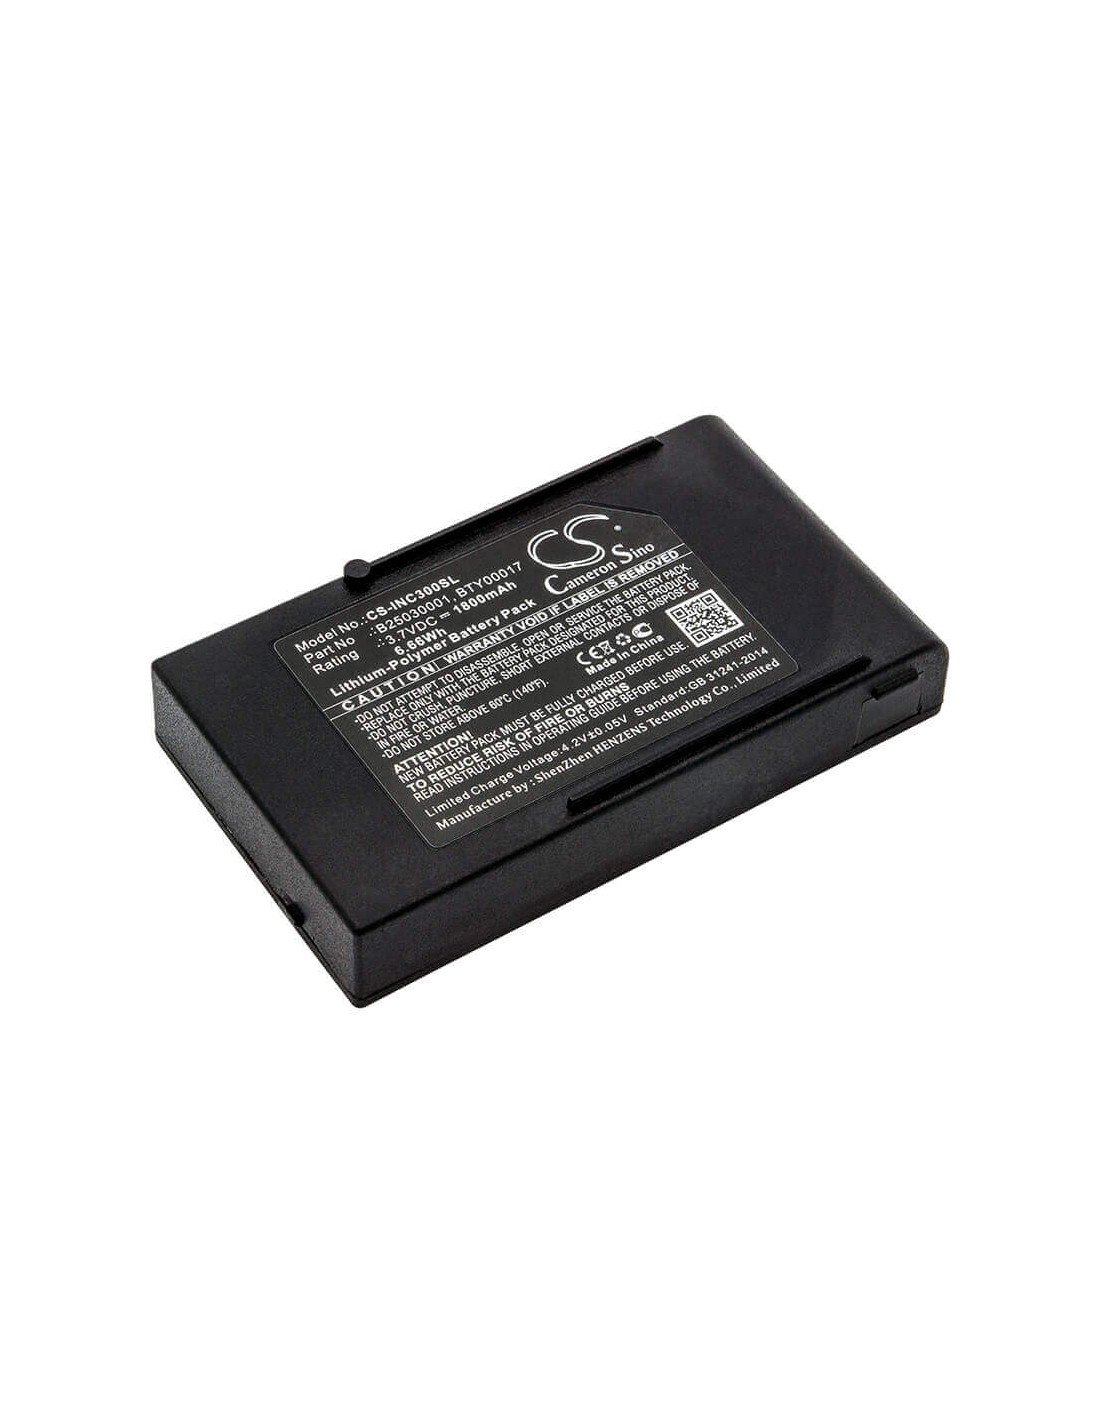 Battery for Ingenico, Db Cox3 3.7V, 1800mAh - 1.00Wh